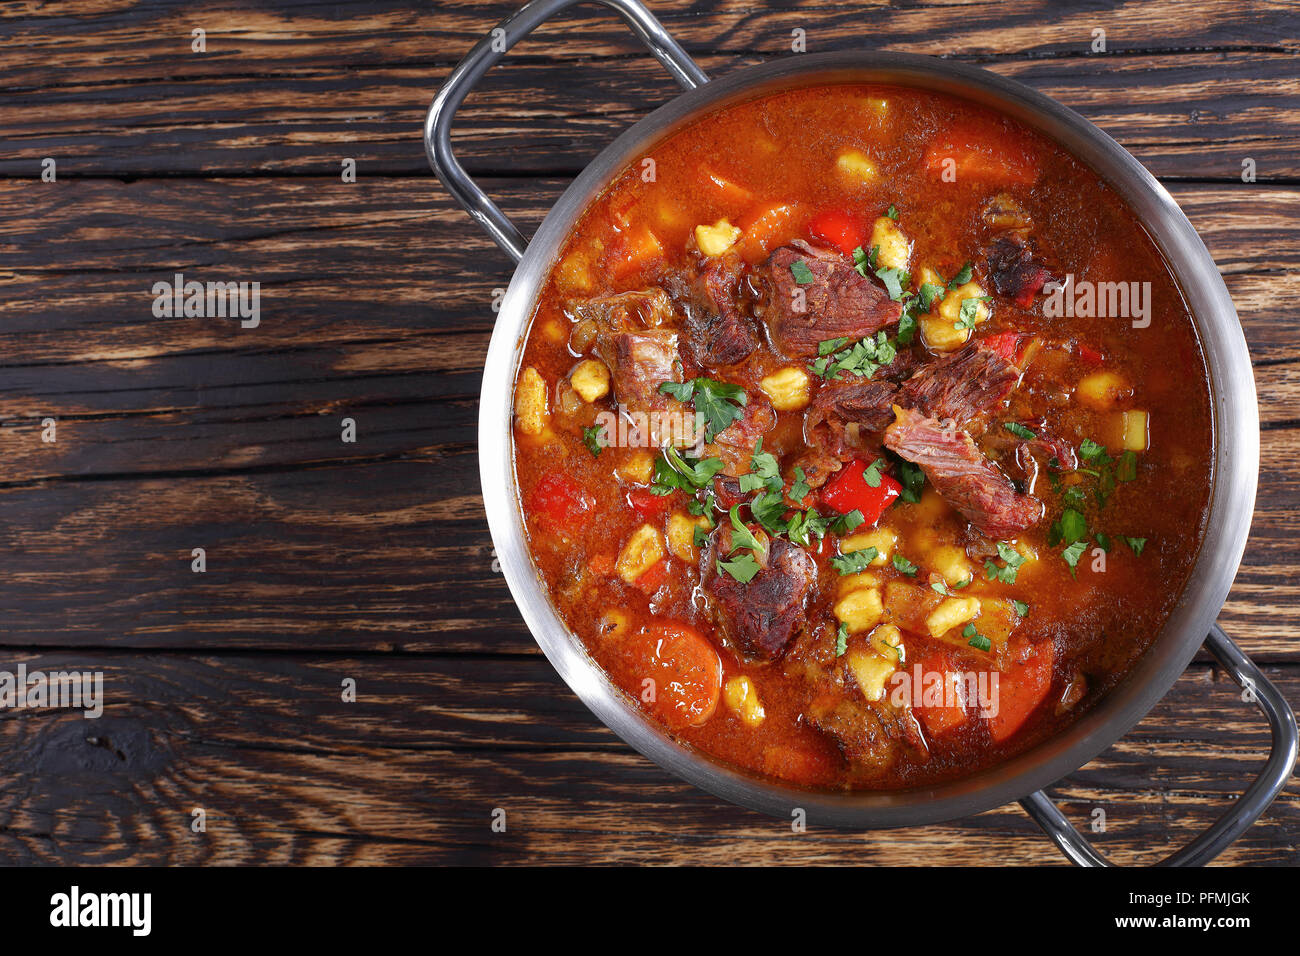 hot beef hungarian goulash or bograch soup with paprika, small egg pasta, vegetables and spices in a pot on wooden table, classic recipe, view from ab Stock Photo